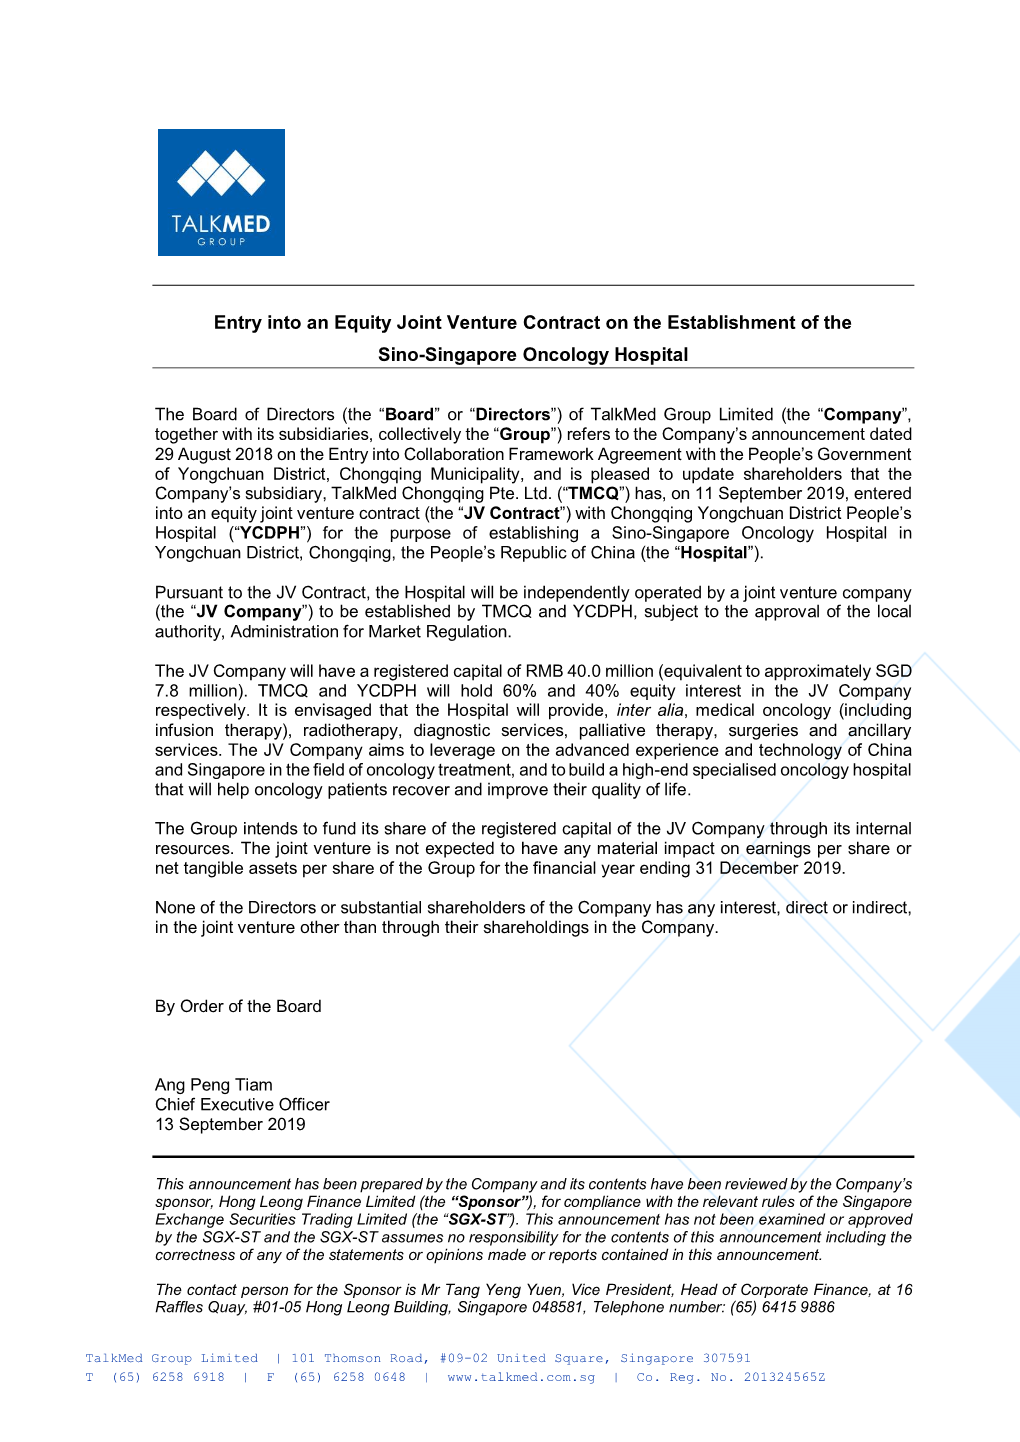 Entry Into an Equity Joint Venture Contract on the Establishment of the Sino-Singapore Oncology Hospital